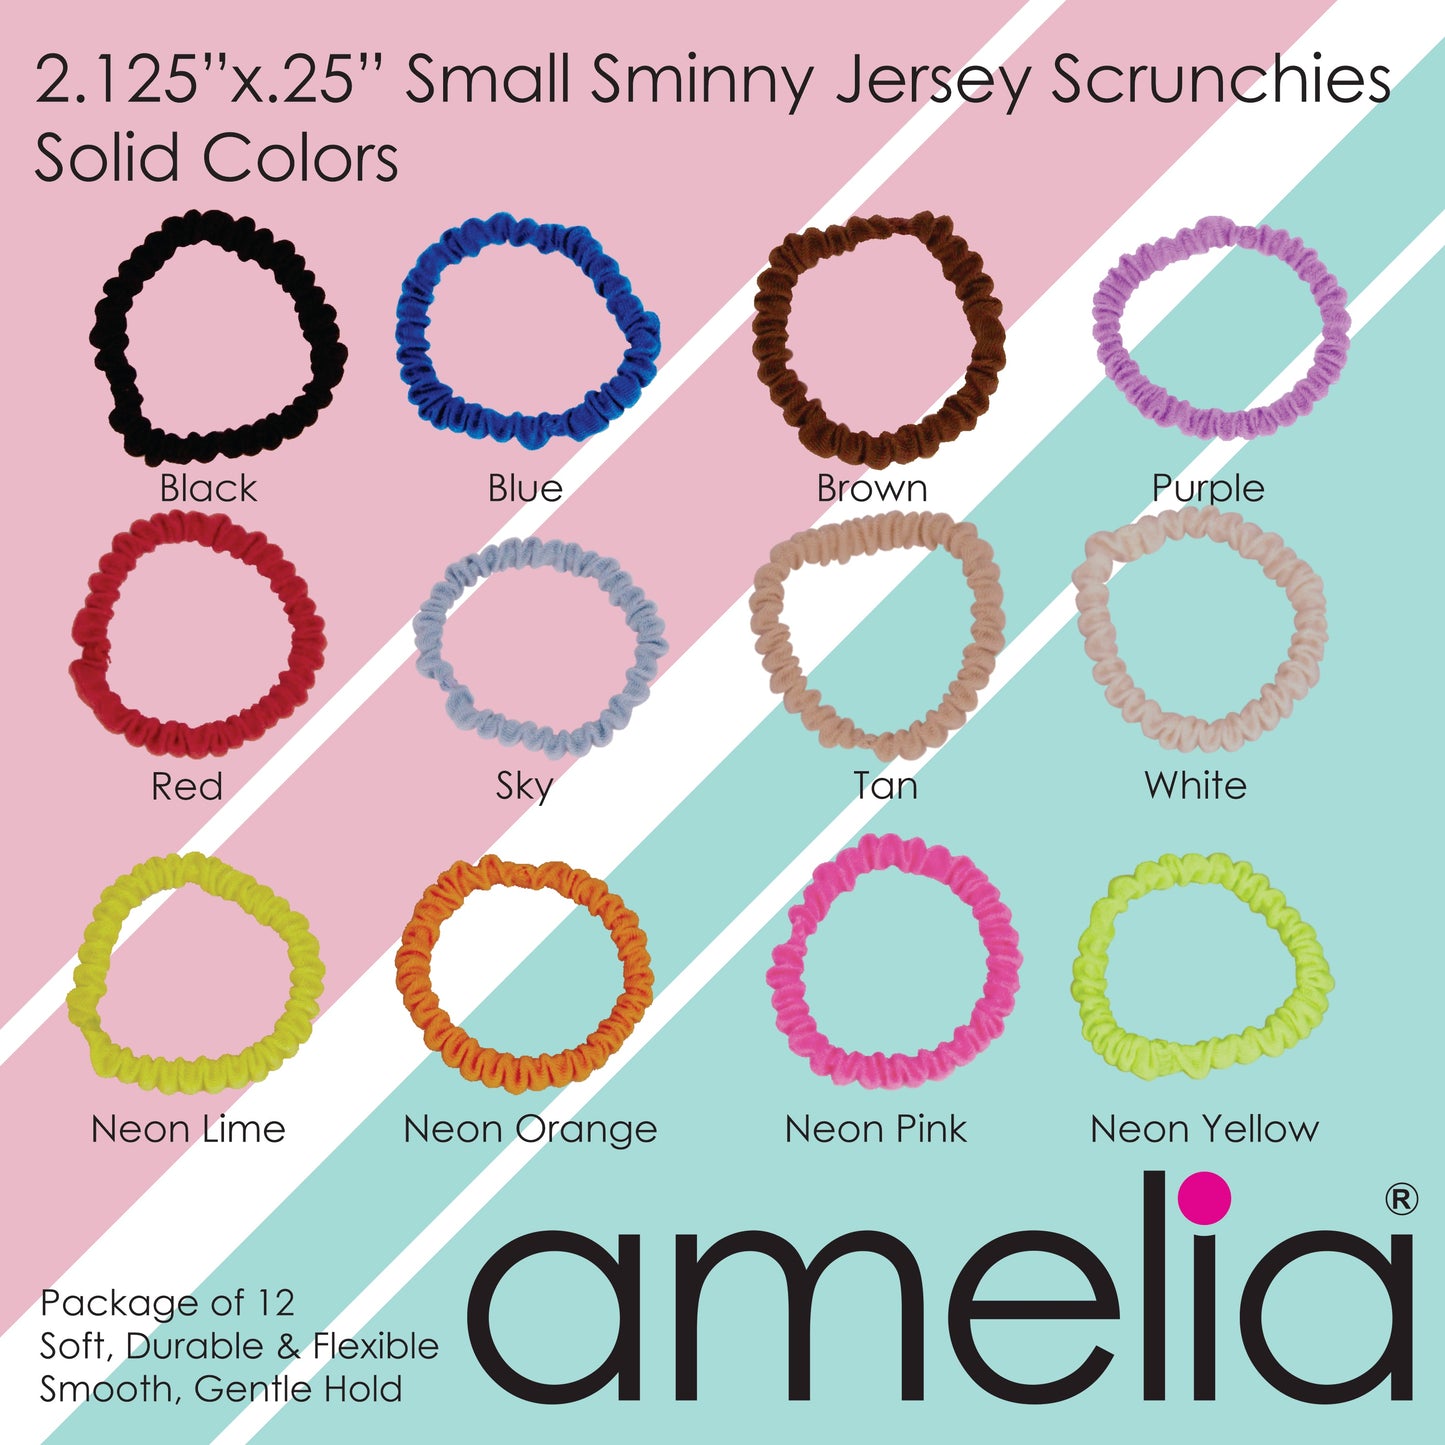 Amelia Beauty, Polka Dot and Stripe Mix Skinny Jersey Scrunchies, 2.125in Diameter, Gentle on Hair, Strong Hold, No Snag, No Dents or Creases. 12 Pack